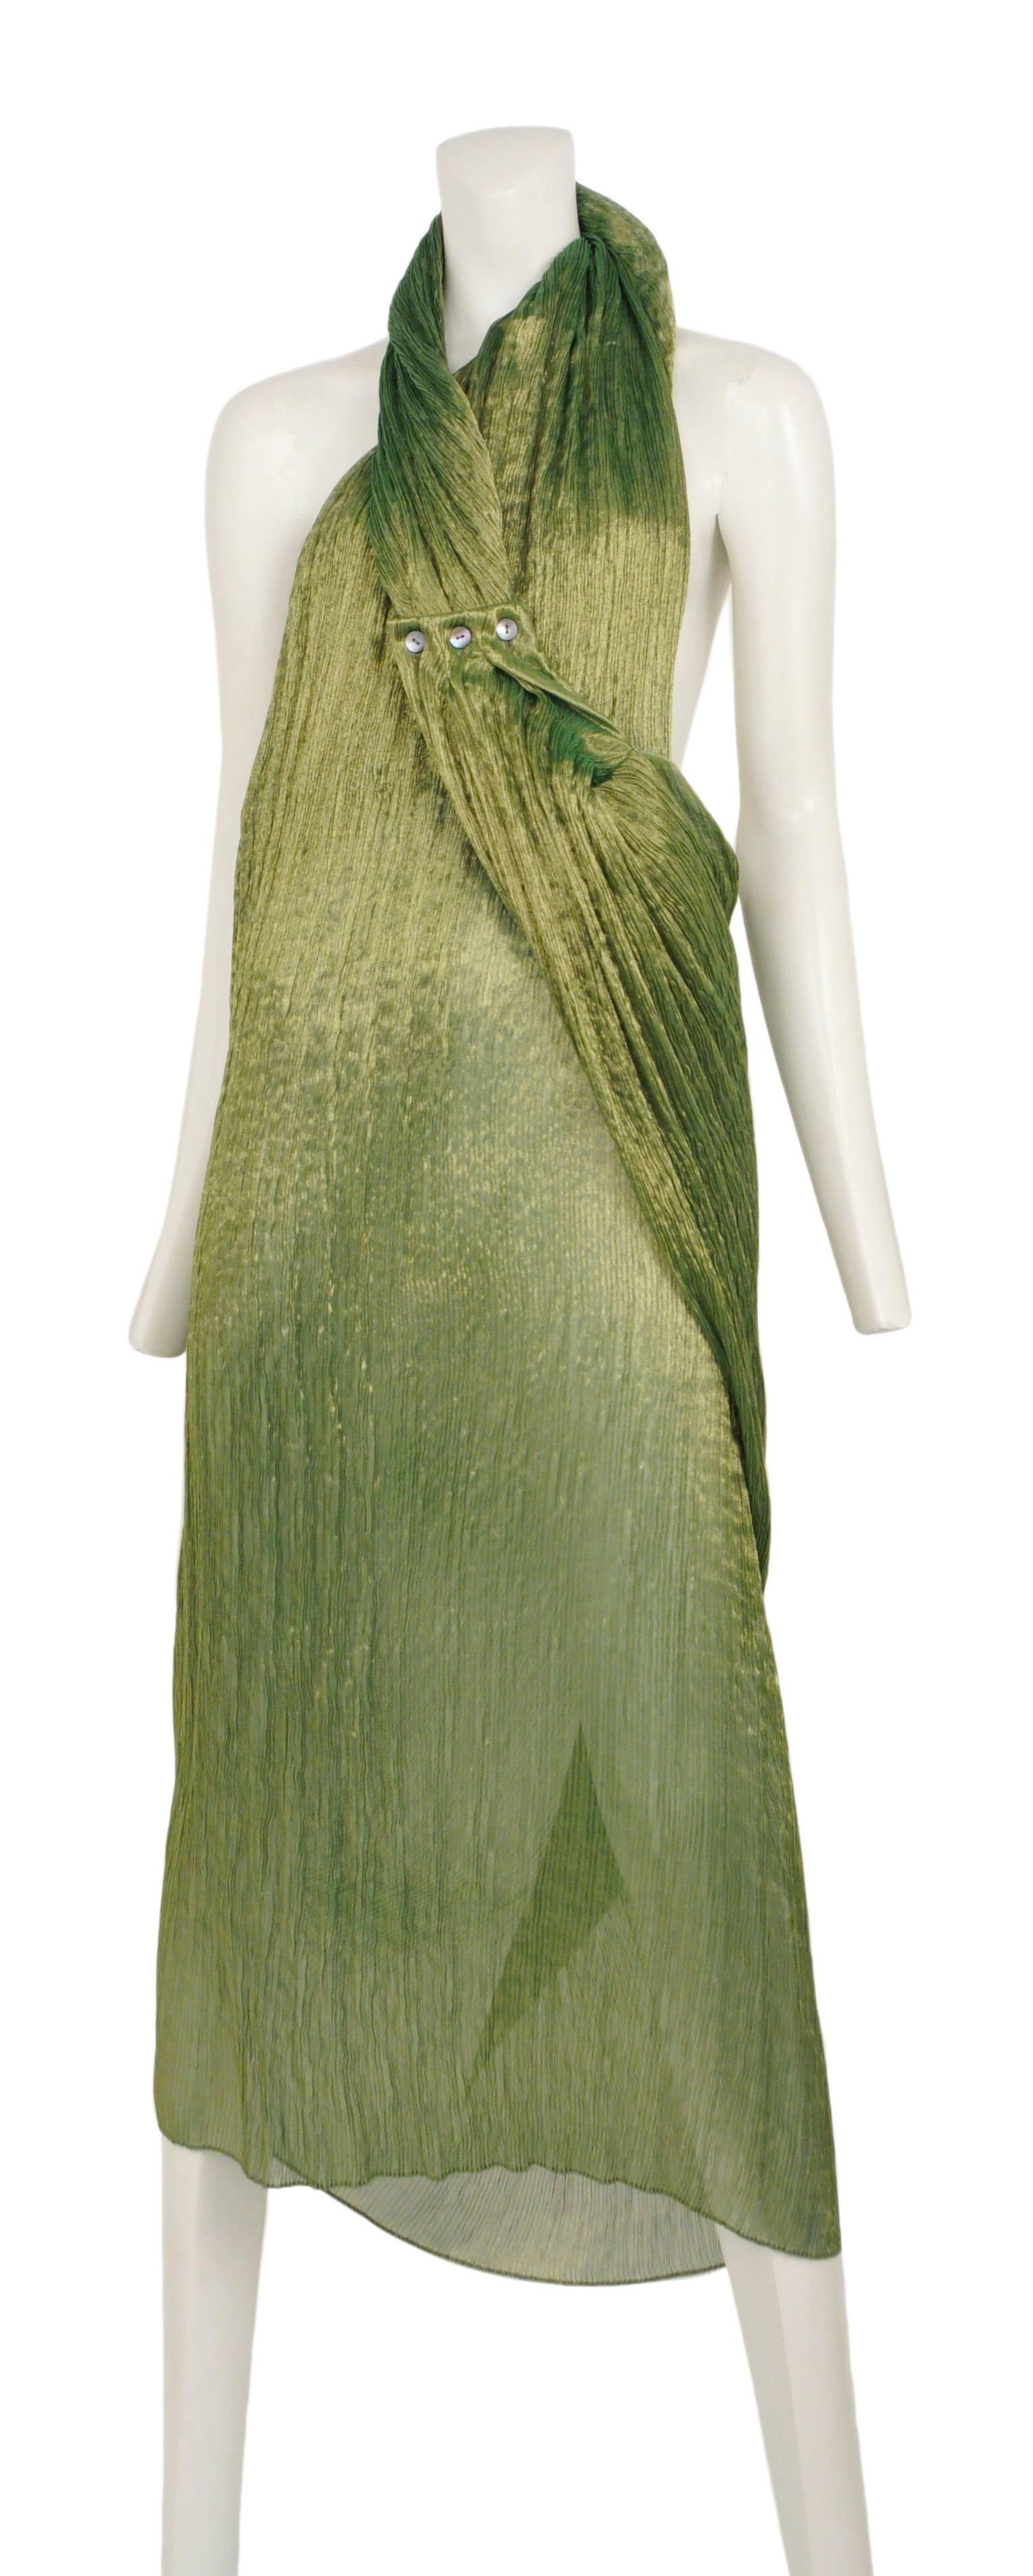 Vintage Romeo Gigli crinkle green wrap dress featuring a halter style collar that wraps around the neck and fastens with three buttons at the bust.
Please inquire for additional images.